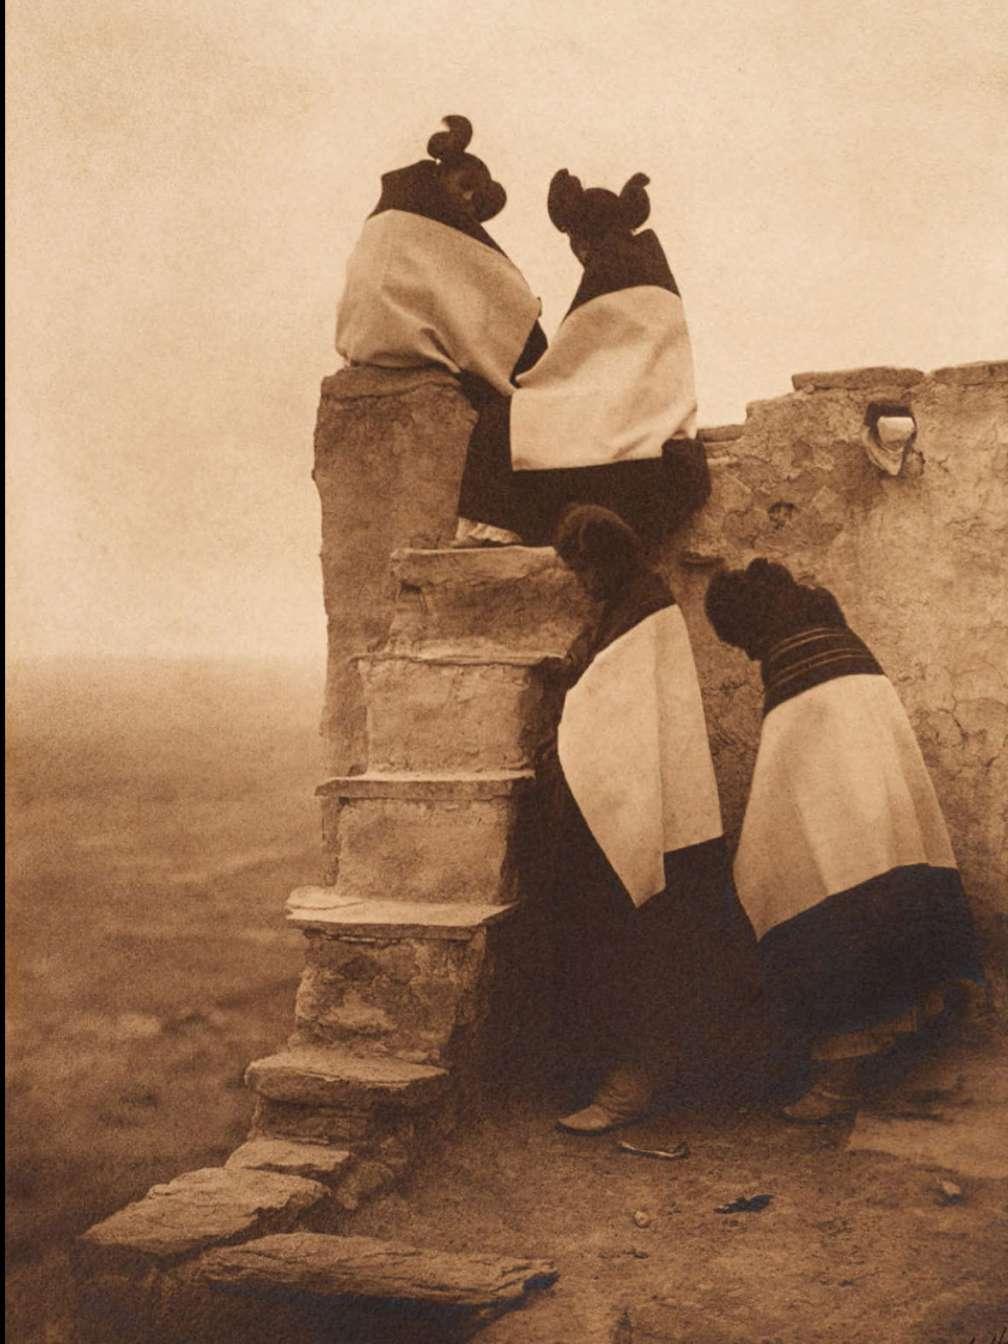 The Princess and the Photographer In 1895 Edward Curtis met elderly Princess Angeline (aka Kickisomlo), last surviving daughter of Duwamish Chief Seattle, from whom the largest city in Washington